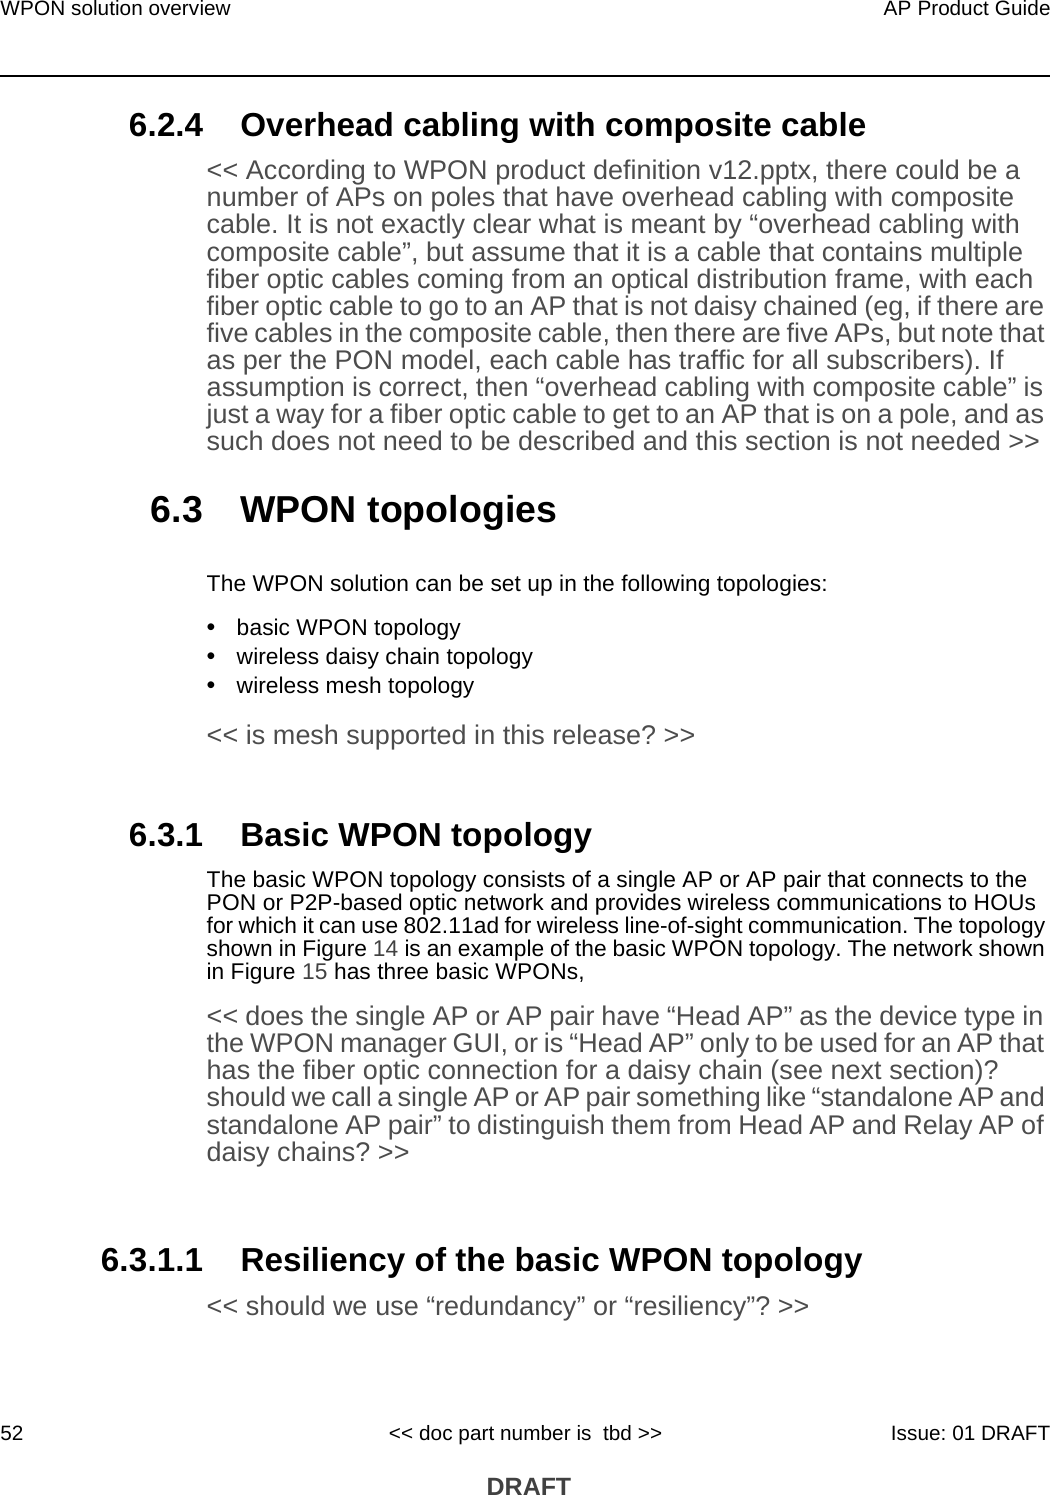 WPON solution overview52AP Product Guide&lt;&lt; doc part number is  tbd &gt;&gt; Issue: 01 DRAFT DRAFT6.2.4 Overhead cabling with composite cable&lt;&lt; According to WPON product definition v12.pptx, there could be a number of APs on poles that have overhead cabling with composite cable. It is not exactly clear what is meant by “overhead cabling with composite cable”, but assume that it is a cable that contains multiple fiber optic cables coming from an optical distribution frame, with each fiber optic cable to go to an AP that is not daisy chained (eg, if there are five cables in the composite cable, then there are five APs, but note that as per the PON model, each cable has traffic for all subscribers). If assumption is correct, then “overhead cabling with composite cable” is just a way for a fiber optic cable to get to an AP that is on a pole, and as such does not need to be described and this section is not needed &gt;&gt;6.3 WPON topologiesThe WPON solution can be set up in the following topologies:•basic WPON topology•wireless daisy chain topology•wireless mesh topology &lt;&lt; is mesh supported in this release? &gt;&gt;6.3.1 Basic WPON topologyThe basic WPON topology consists of a single AP or AP pair that connects to the PON or P2P-based optic network and provides wireless communications to HOUs for which it can use 802.11ad for wireless line-of-sight communication. The topology shown in Figure 14 is an example of the basic WPON topology. The network shown in Figure 15 has three basic WPONs,&lt;&lt; does the single AP or AP pair have “Head AP” as the device type in the WPON manager GUI, or is “Head AP” only to be used for an AP that has the fiber optic connection for a daisy chain (see next section)? should we call a single AP or AP pair something like “standalone AP and standalone AP pair” to distinguish them from Head AP and Relay AP of daisy chains? &gt;&gt; 6.3.1.1 Resiliency of the basic WPON topology&lt;&lt; should we use “redundancy” or “resiliency”? &gt;&gt;